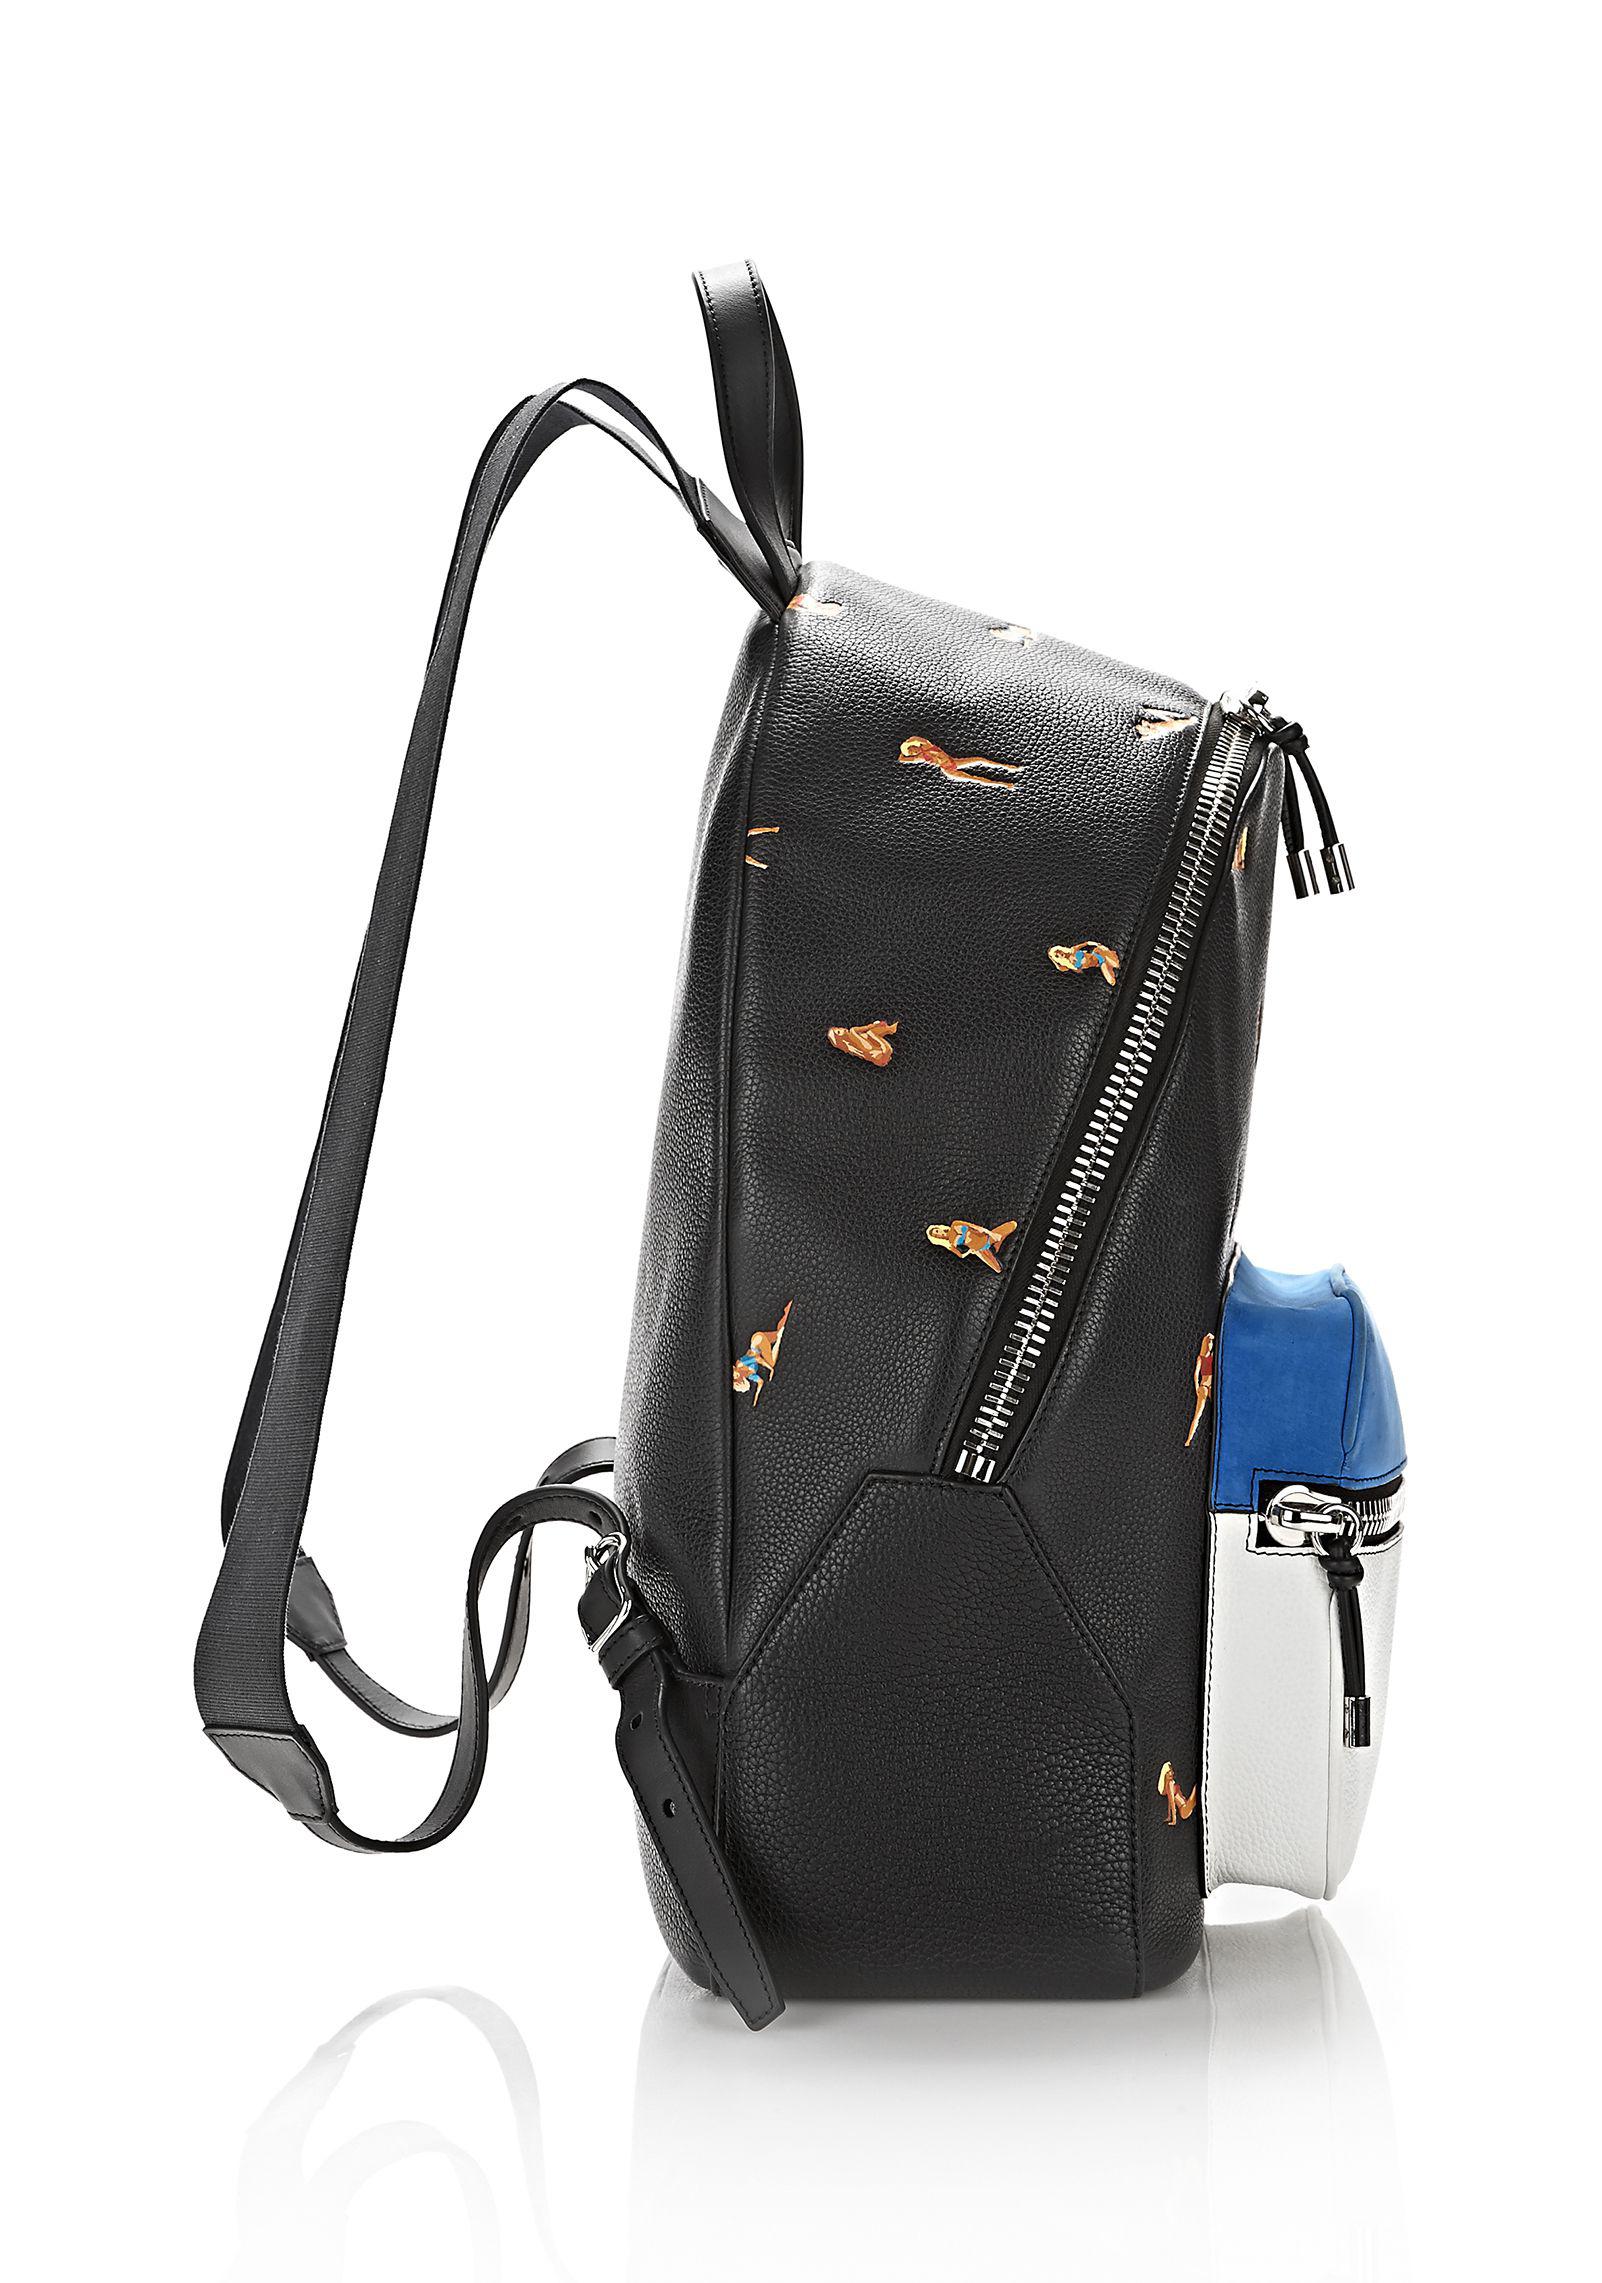 Alexander Wang Leather Berkeley Backpack Pebbled Black With Embroidered  Bikini Babes for Men - Lyst